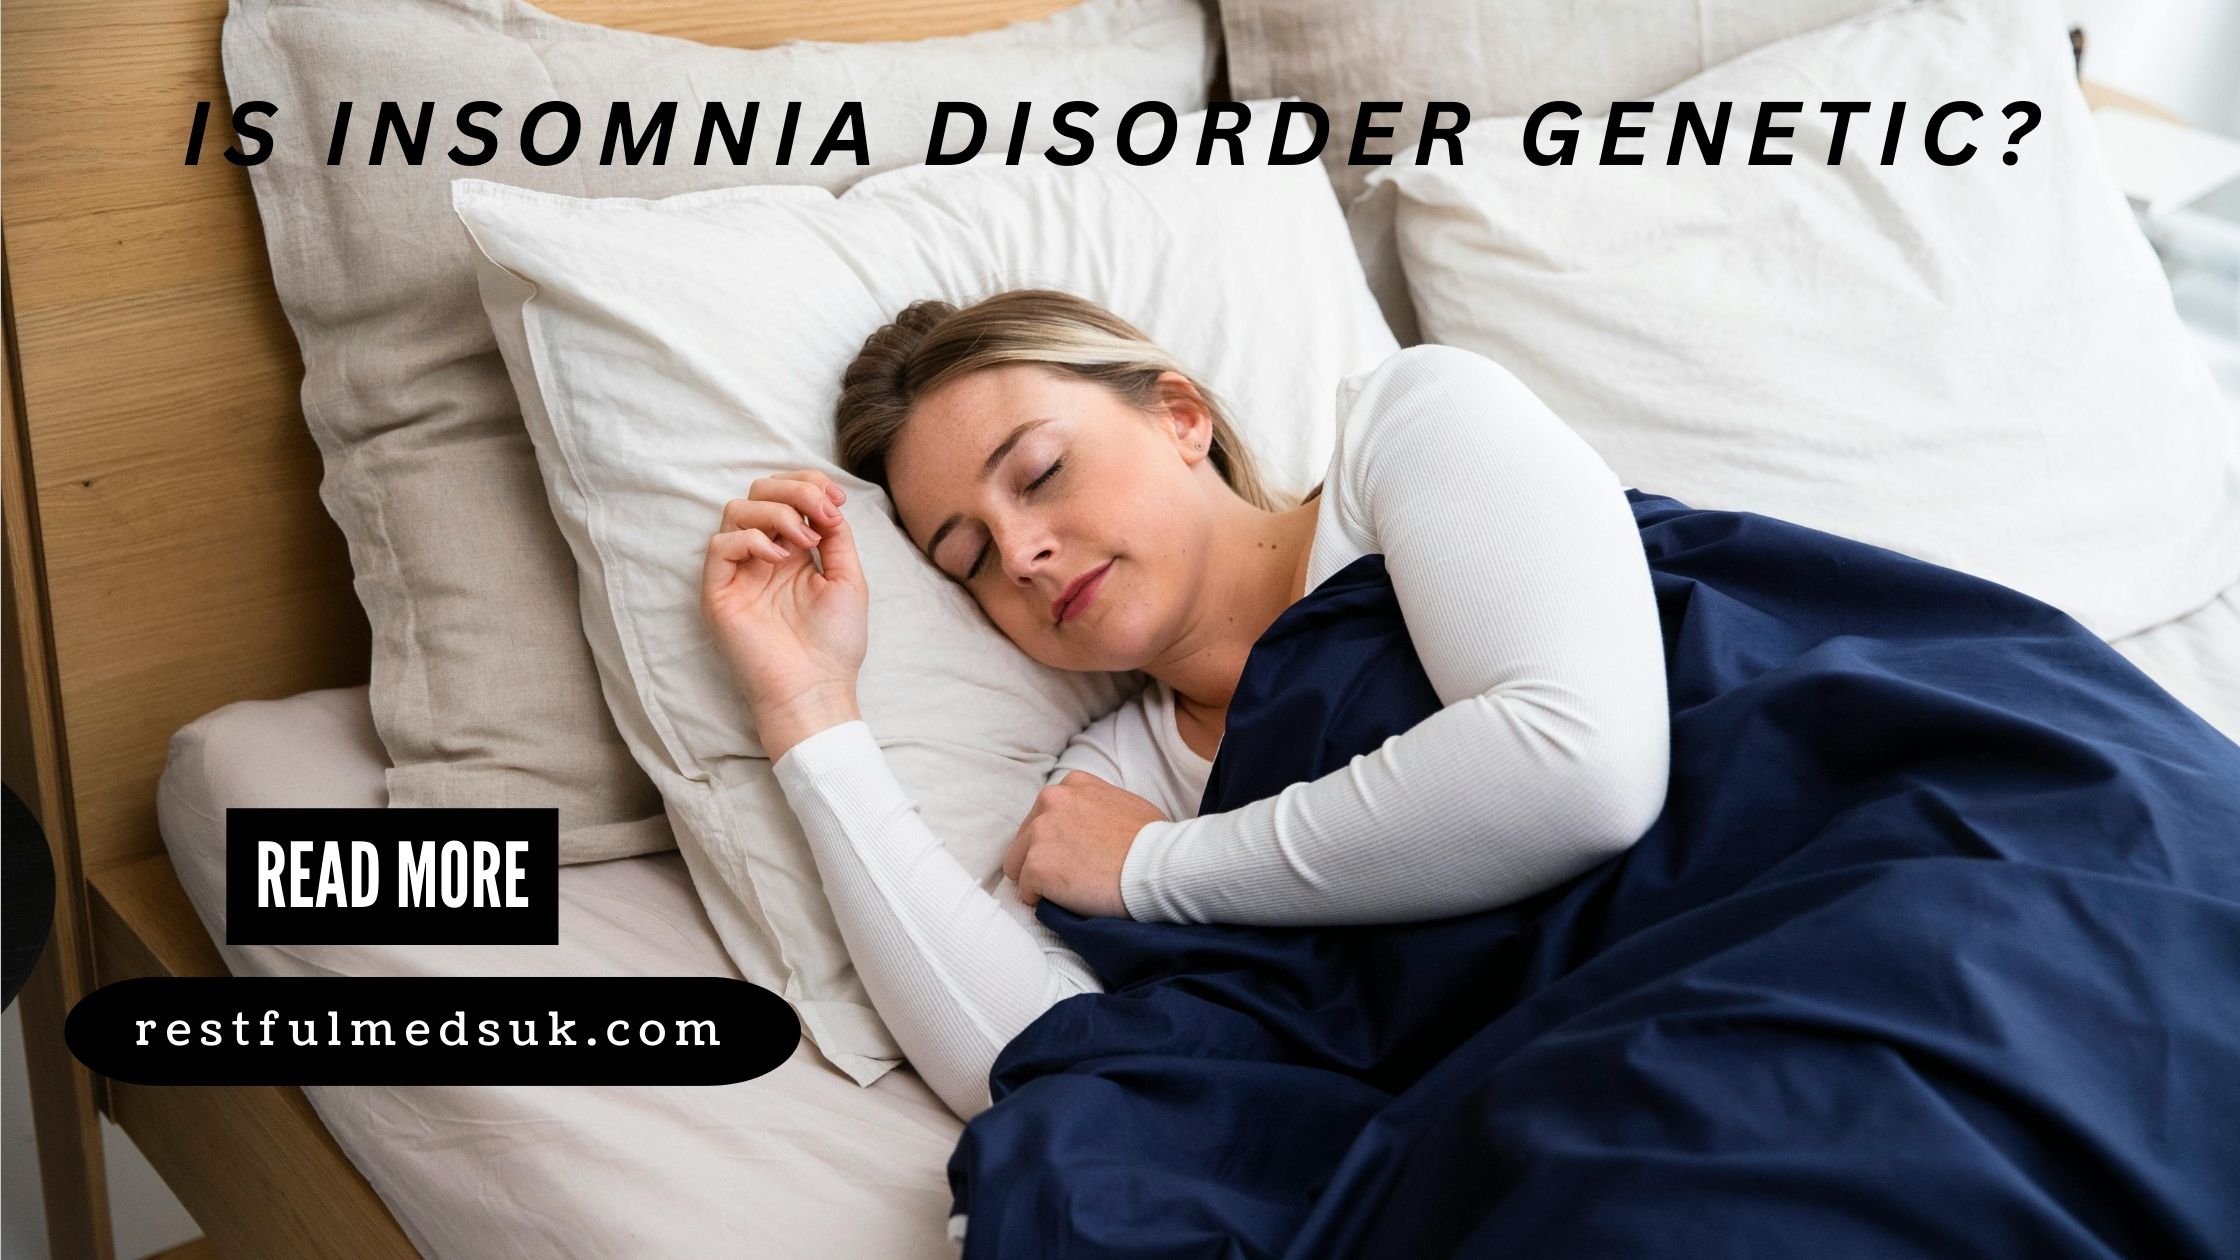 Is Insomnia Disorder Genetic?